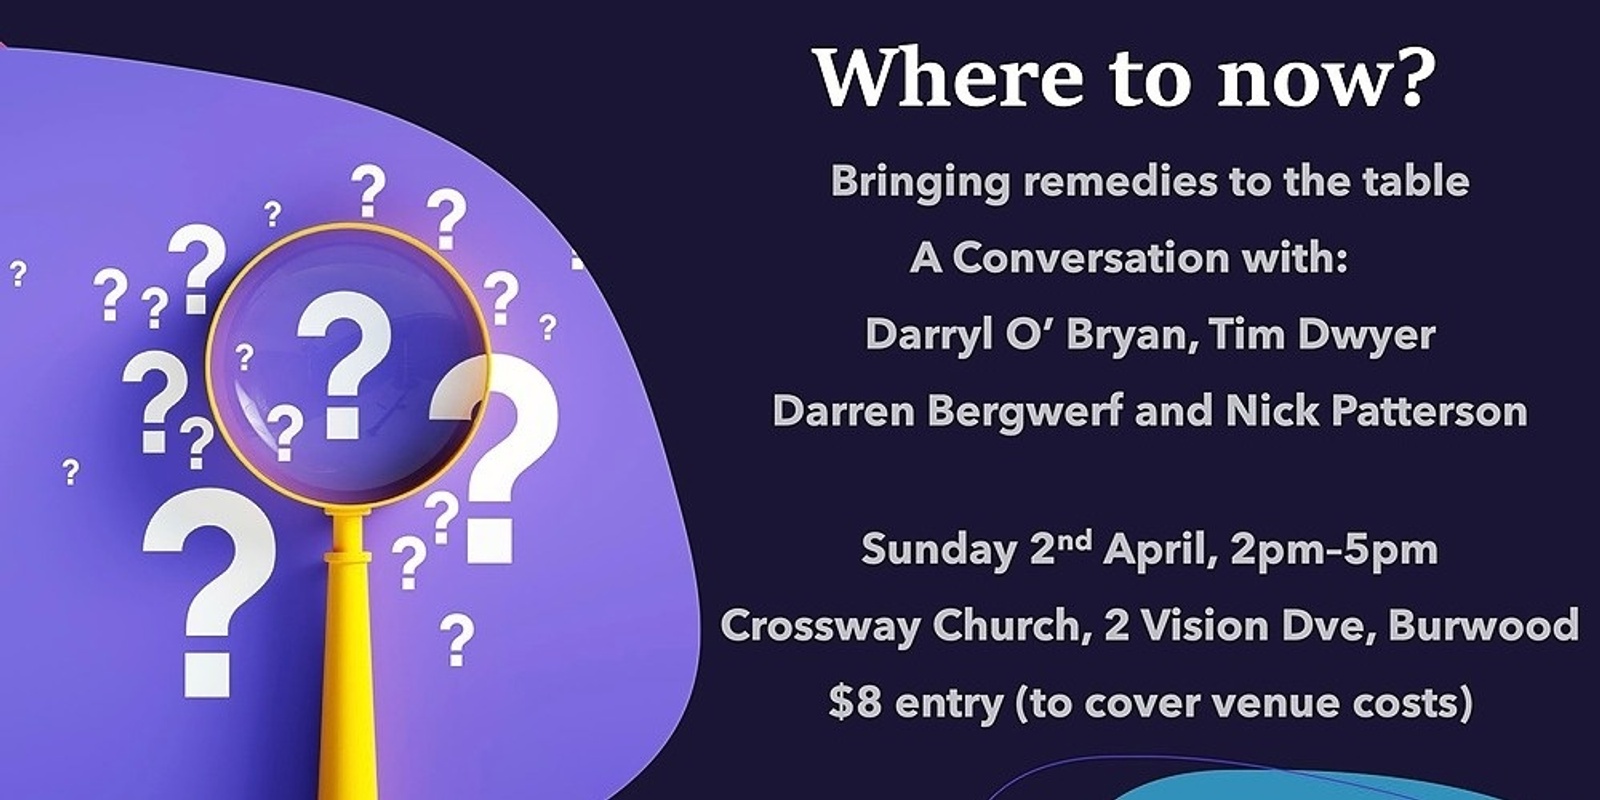 Banner image for Where to now?  Bringing remedies to the table.  A Conversation with Darryl O'Bryan, Tim Dwyer, Darren Bergwerf & Nick Patterson